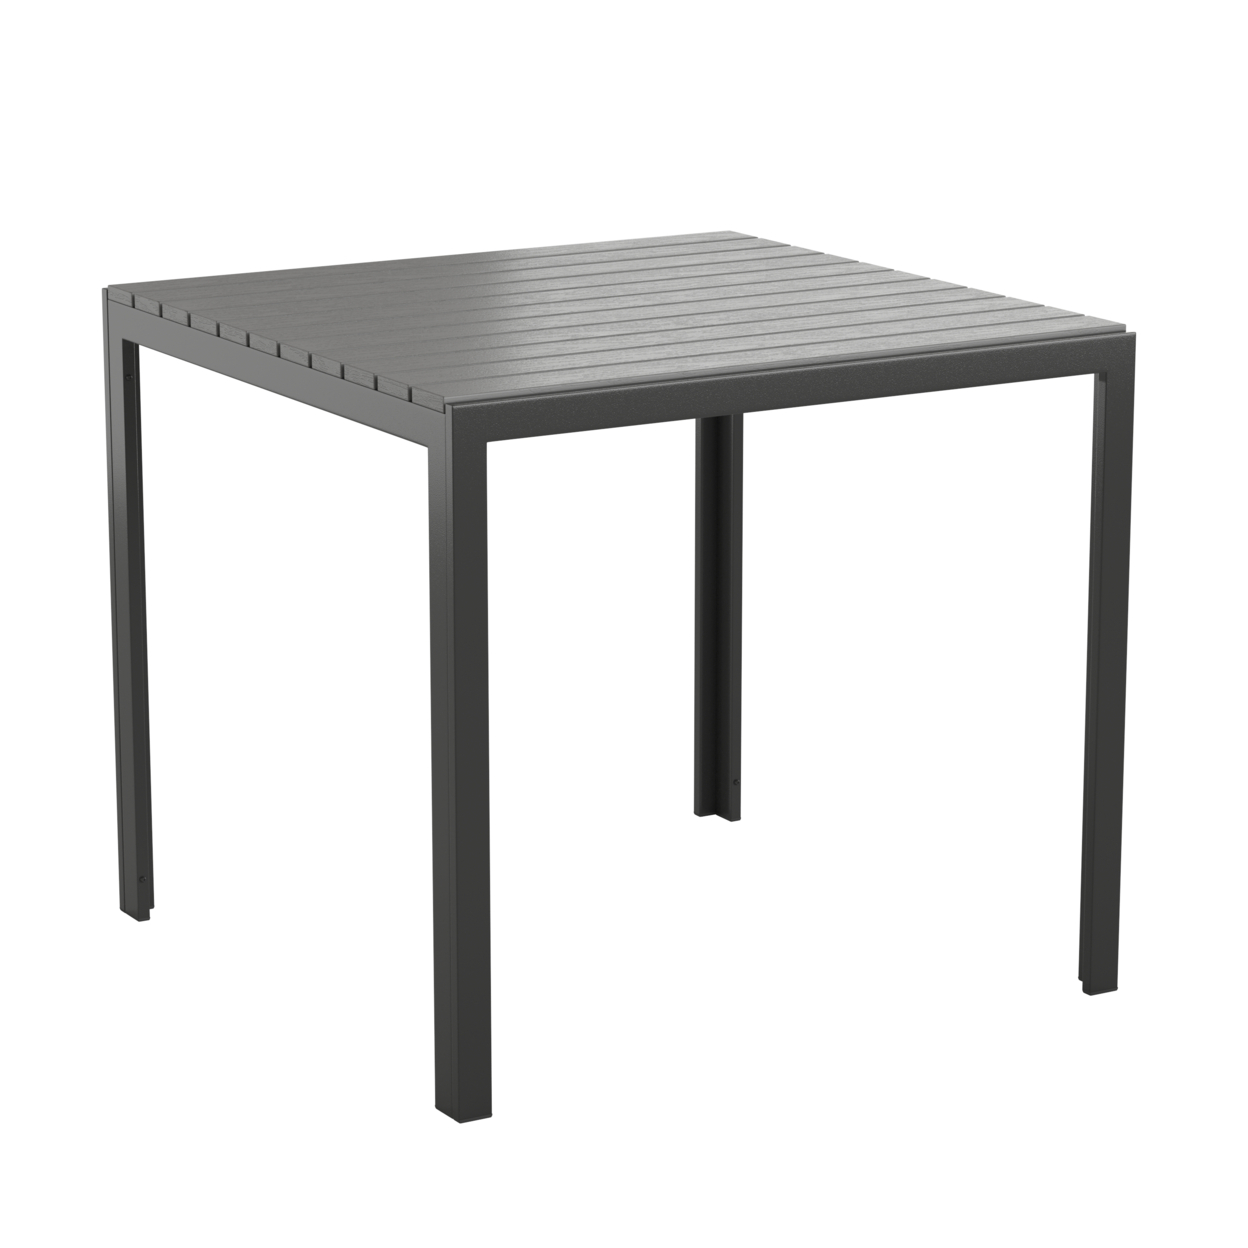 Indoor Outdoor Square Dining Table With Poly Resin Slatted Top, Black Metal